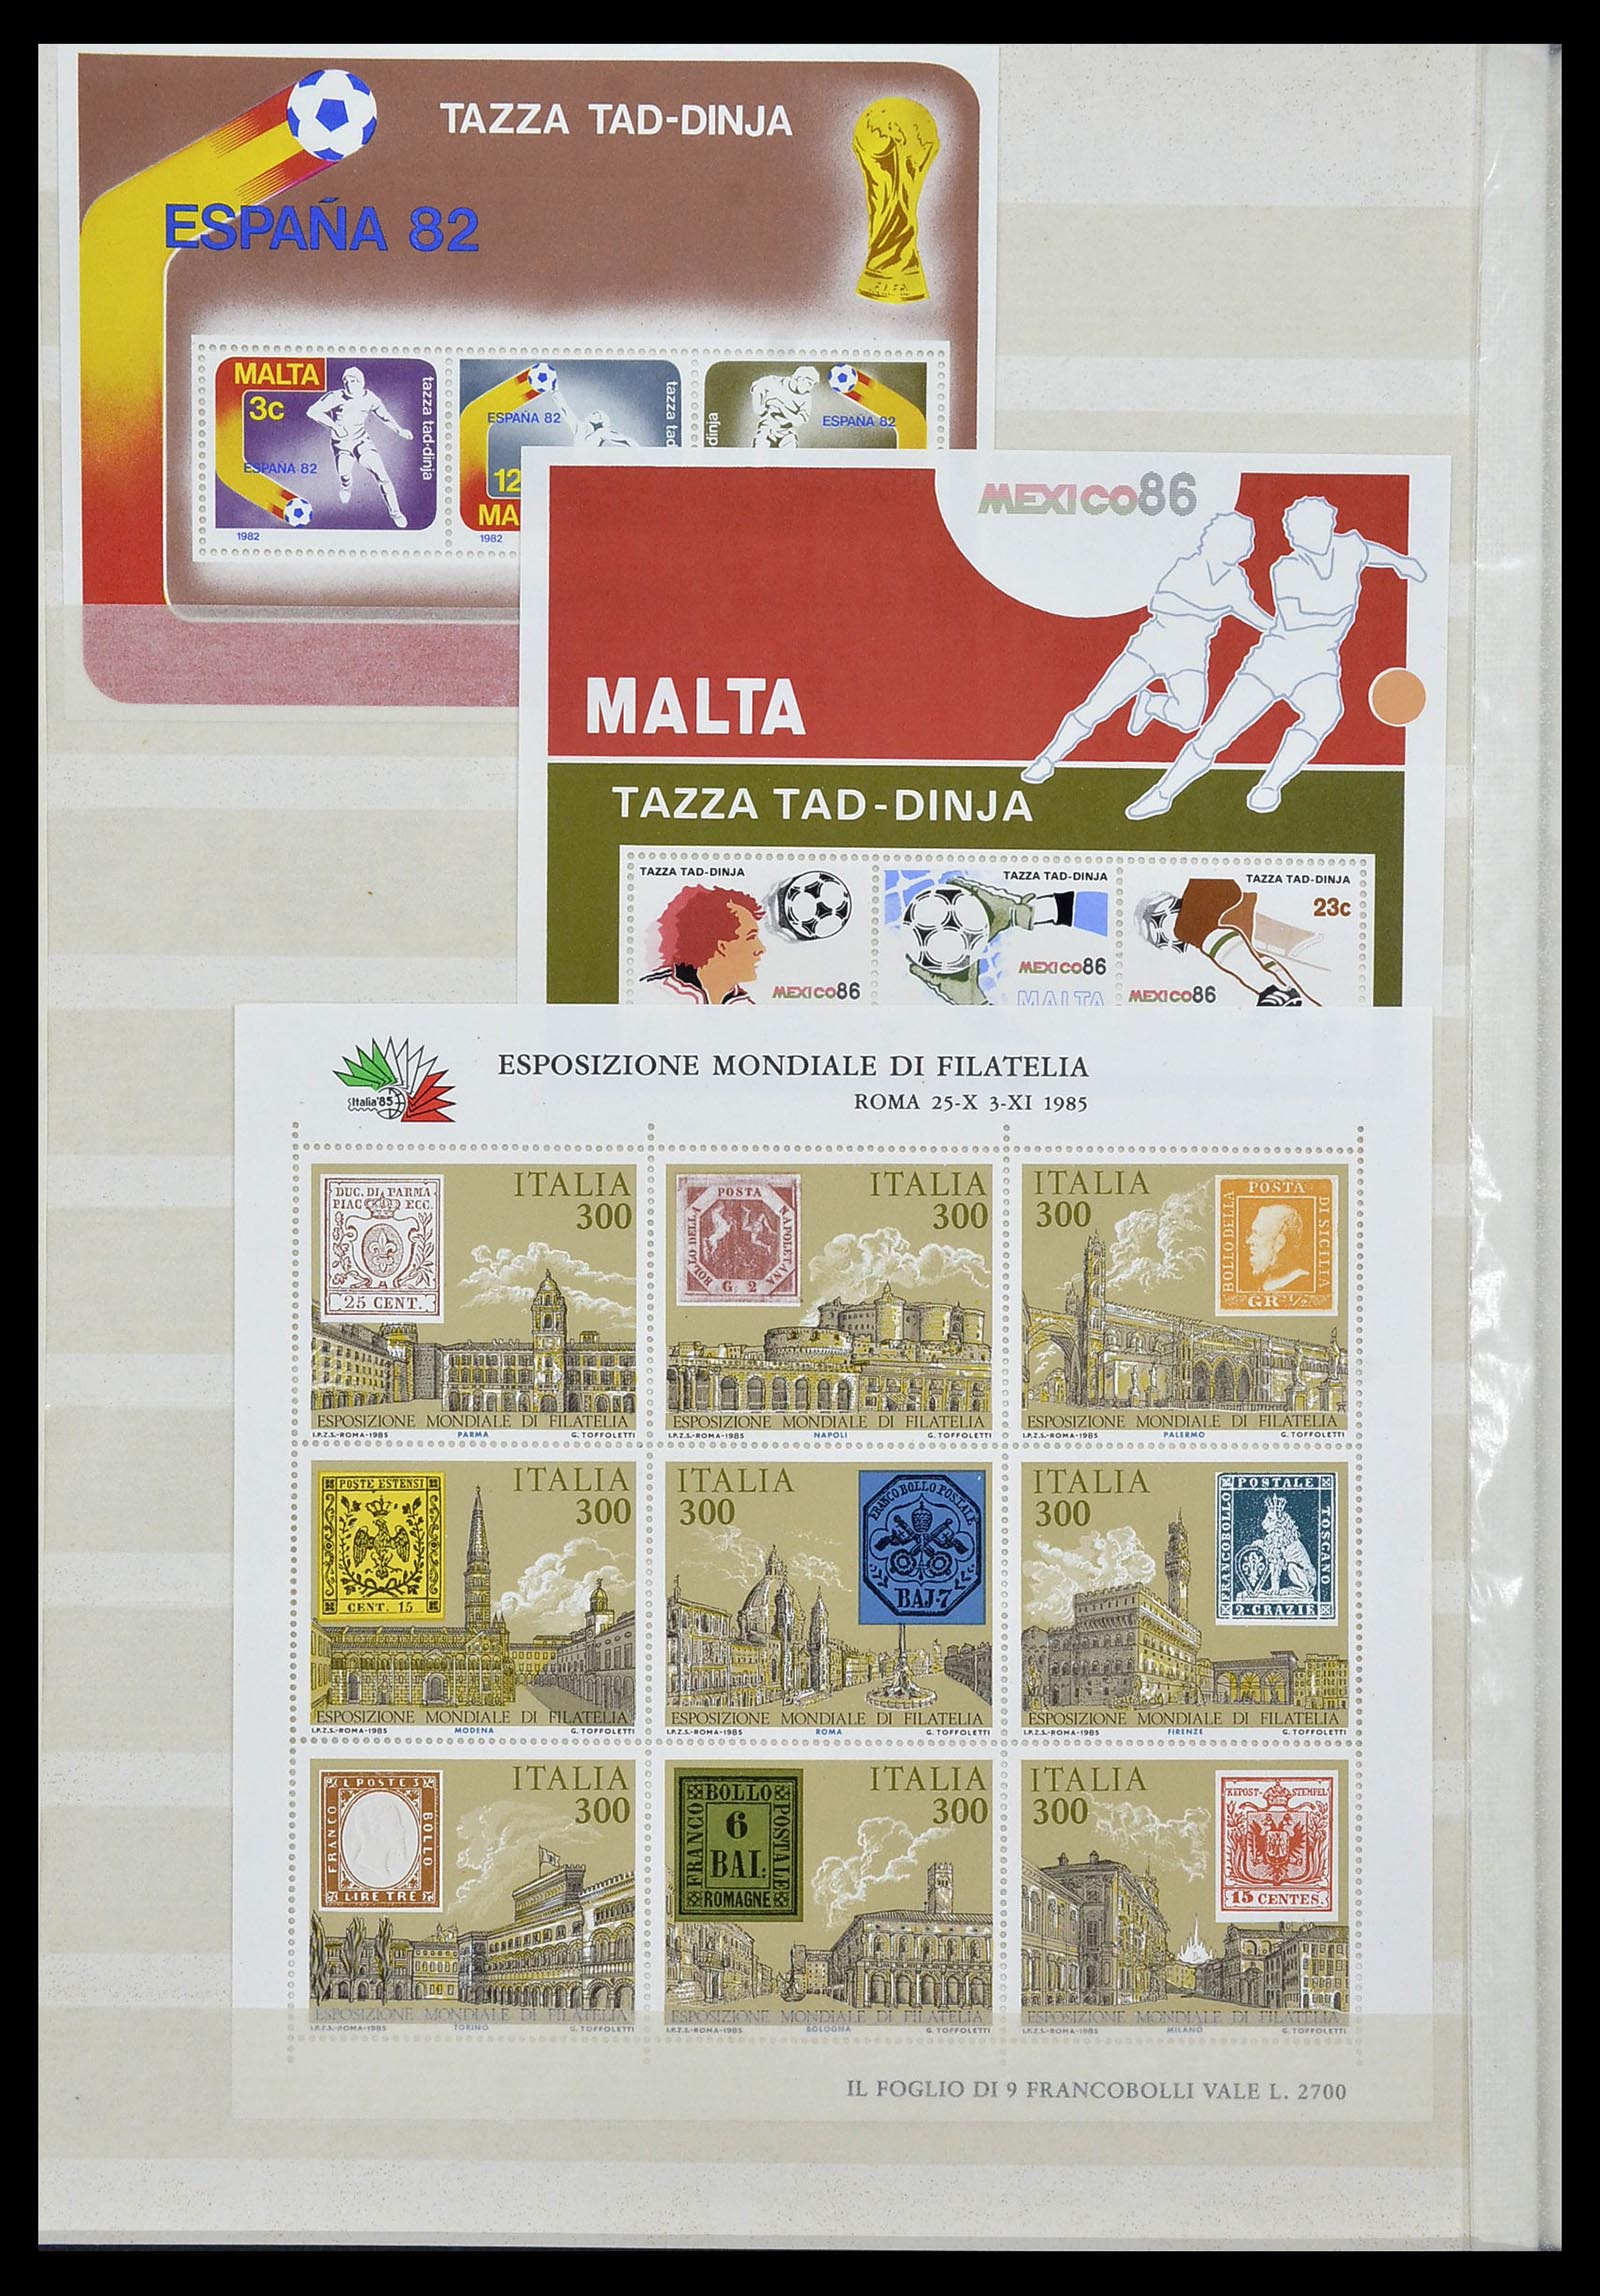 34045 038 - Stamp collection 34045 Western Europe souvenir sheets 1973-1986.